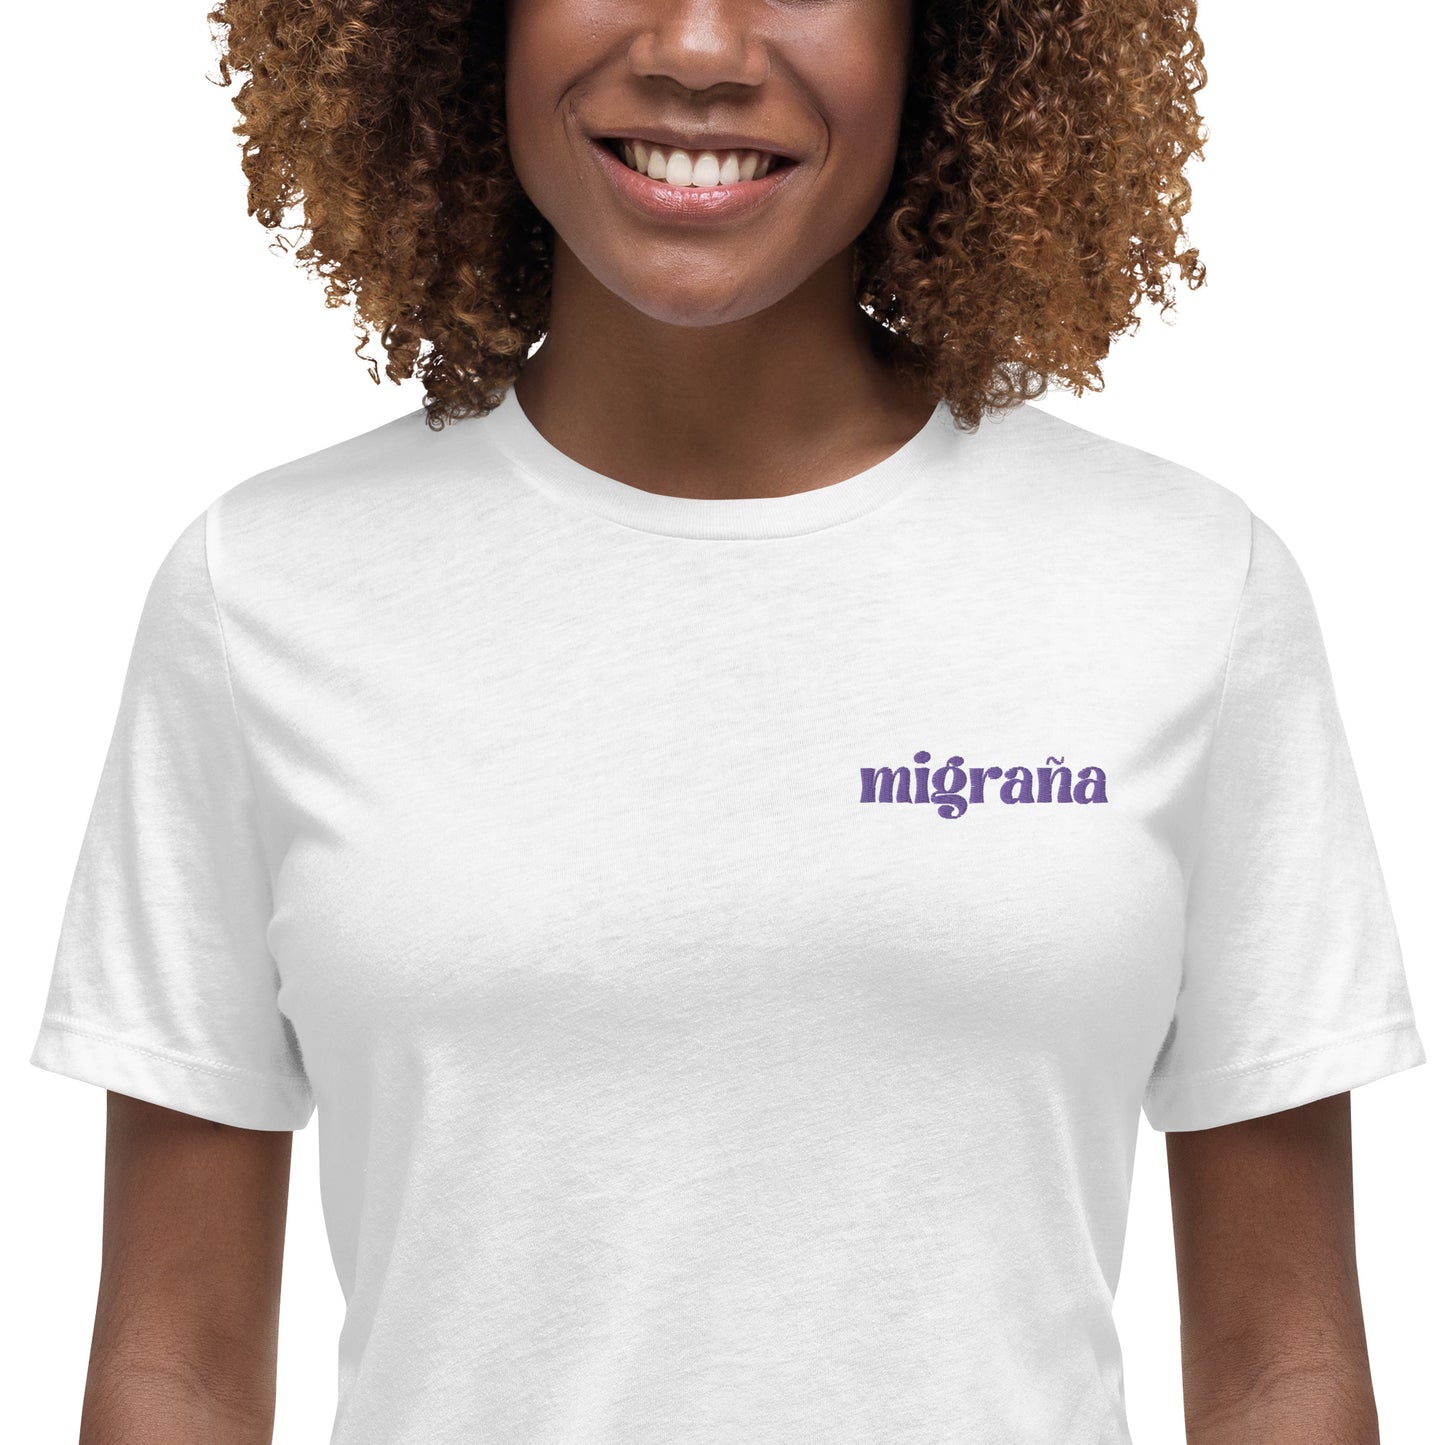 Migraña Embroidered Women's T-Shirt